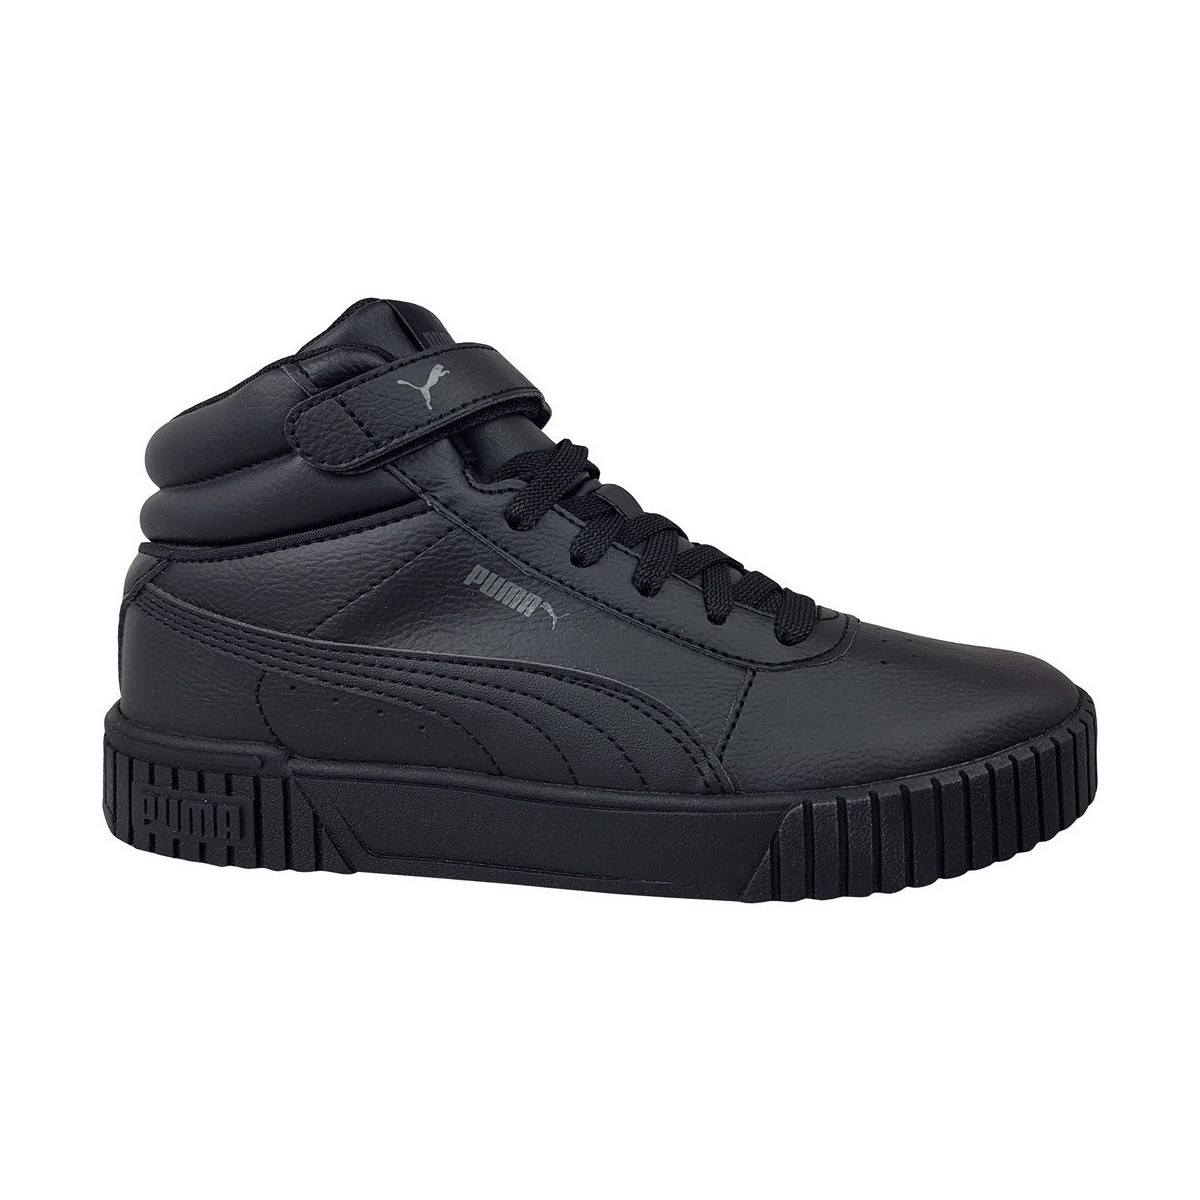 puma  carina 20 mid ps  boys's children's shoes (high-top trainers) in black